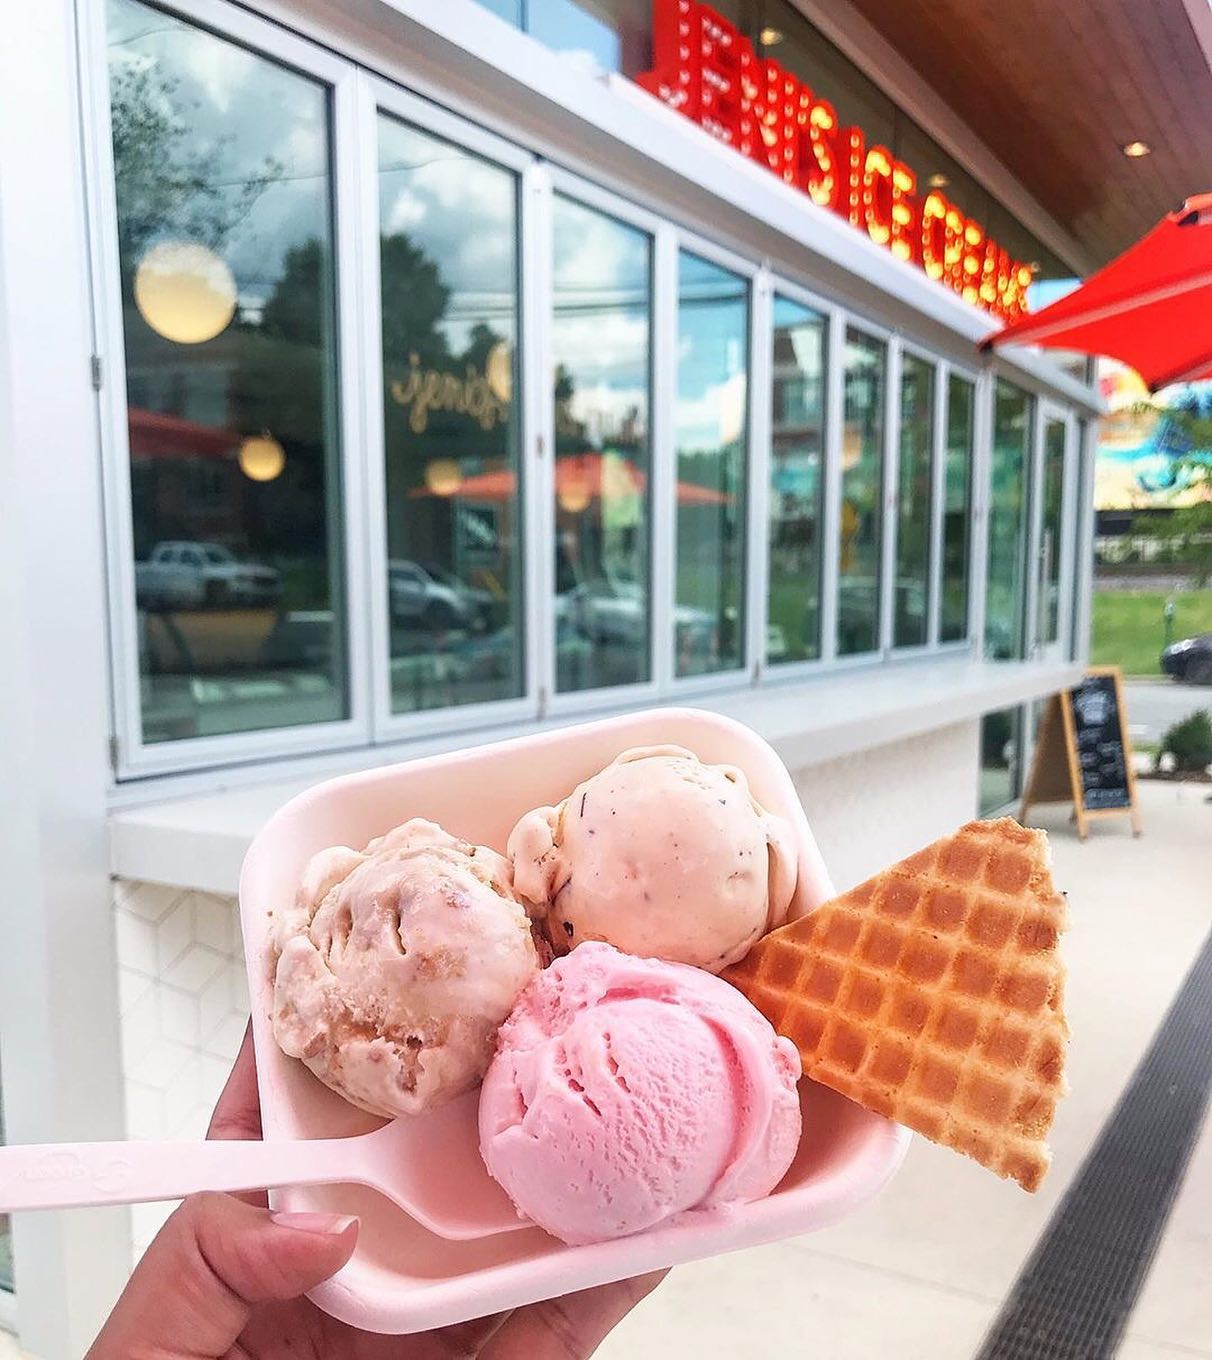 117195078 10164282320500492 1003547735200645948 o Jeni's Ice Cream, Ignite Cycle and more new openings in Birmingham